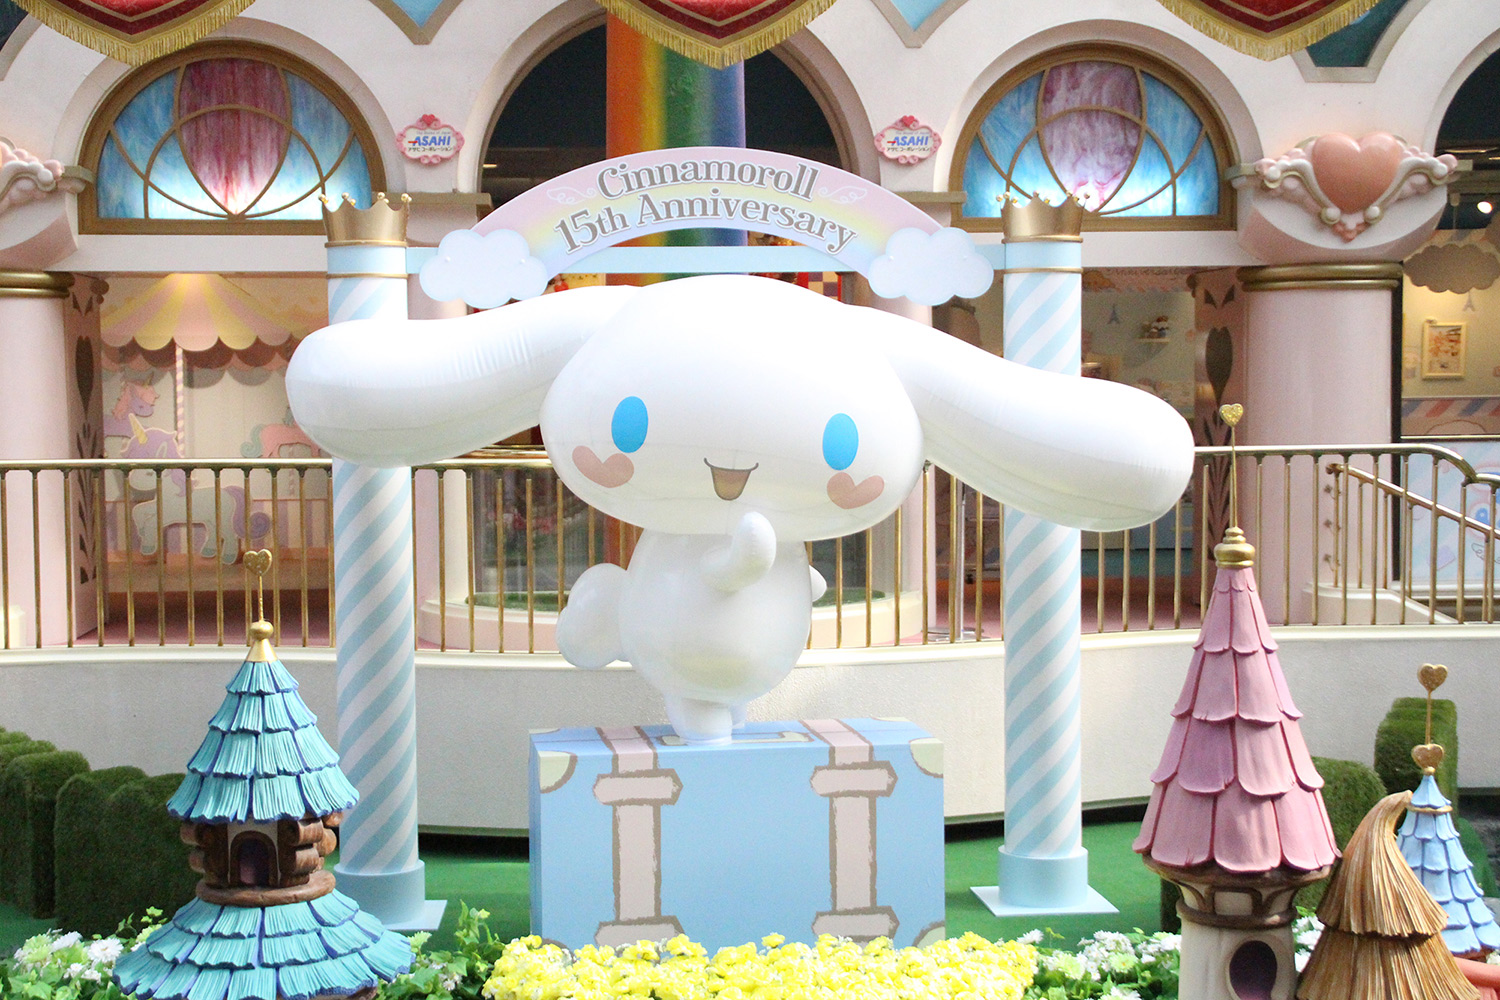 Let's celebrate the 15th anniversary of a popular character Cinnamoroll together! Sanrio Puroland will host his anniversary event